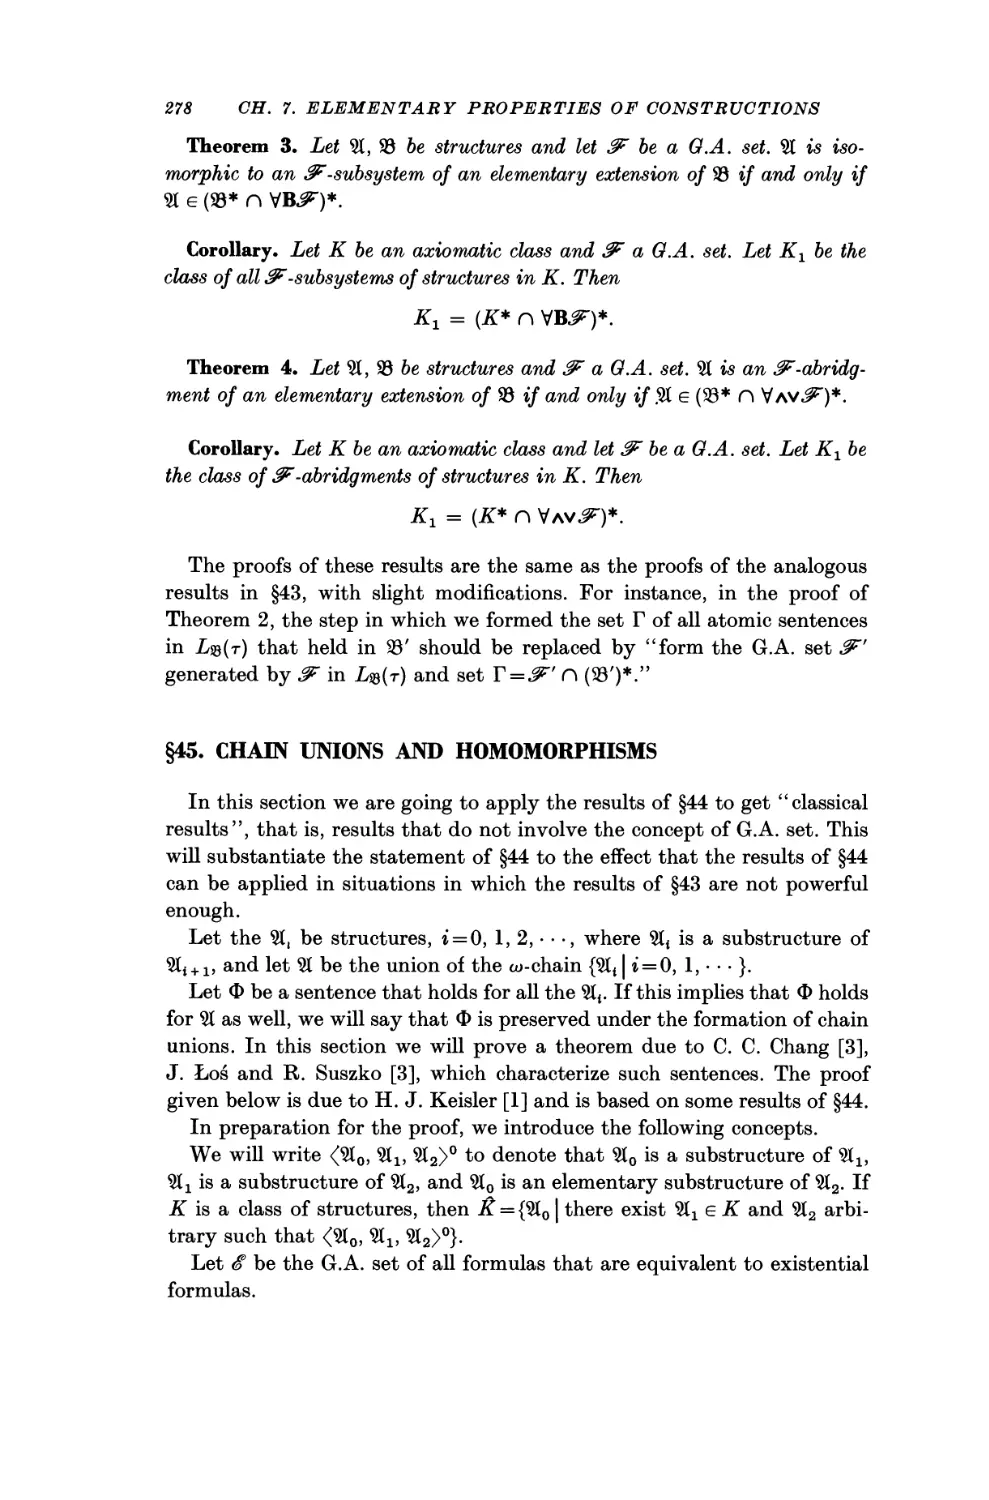 §45. Chain Unions and Homomorphisms